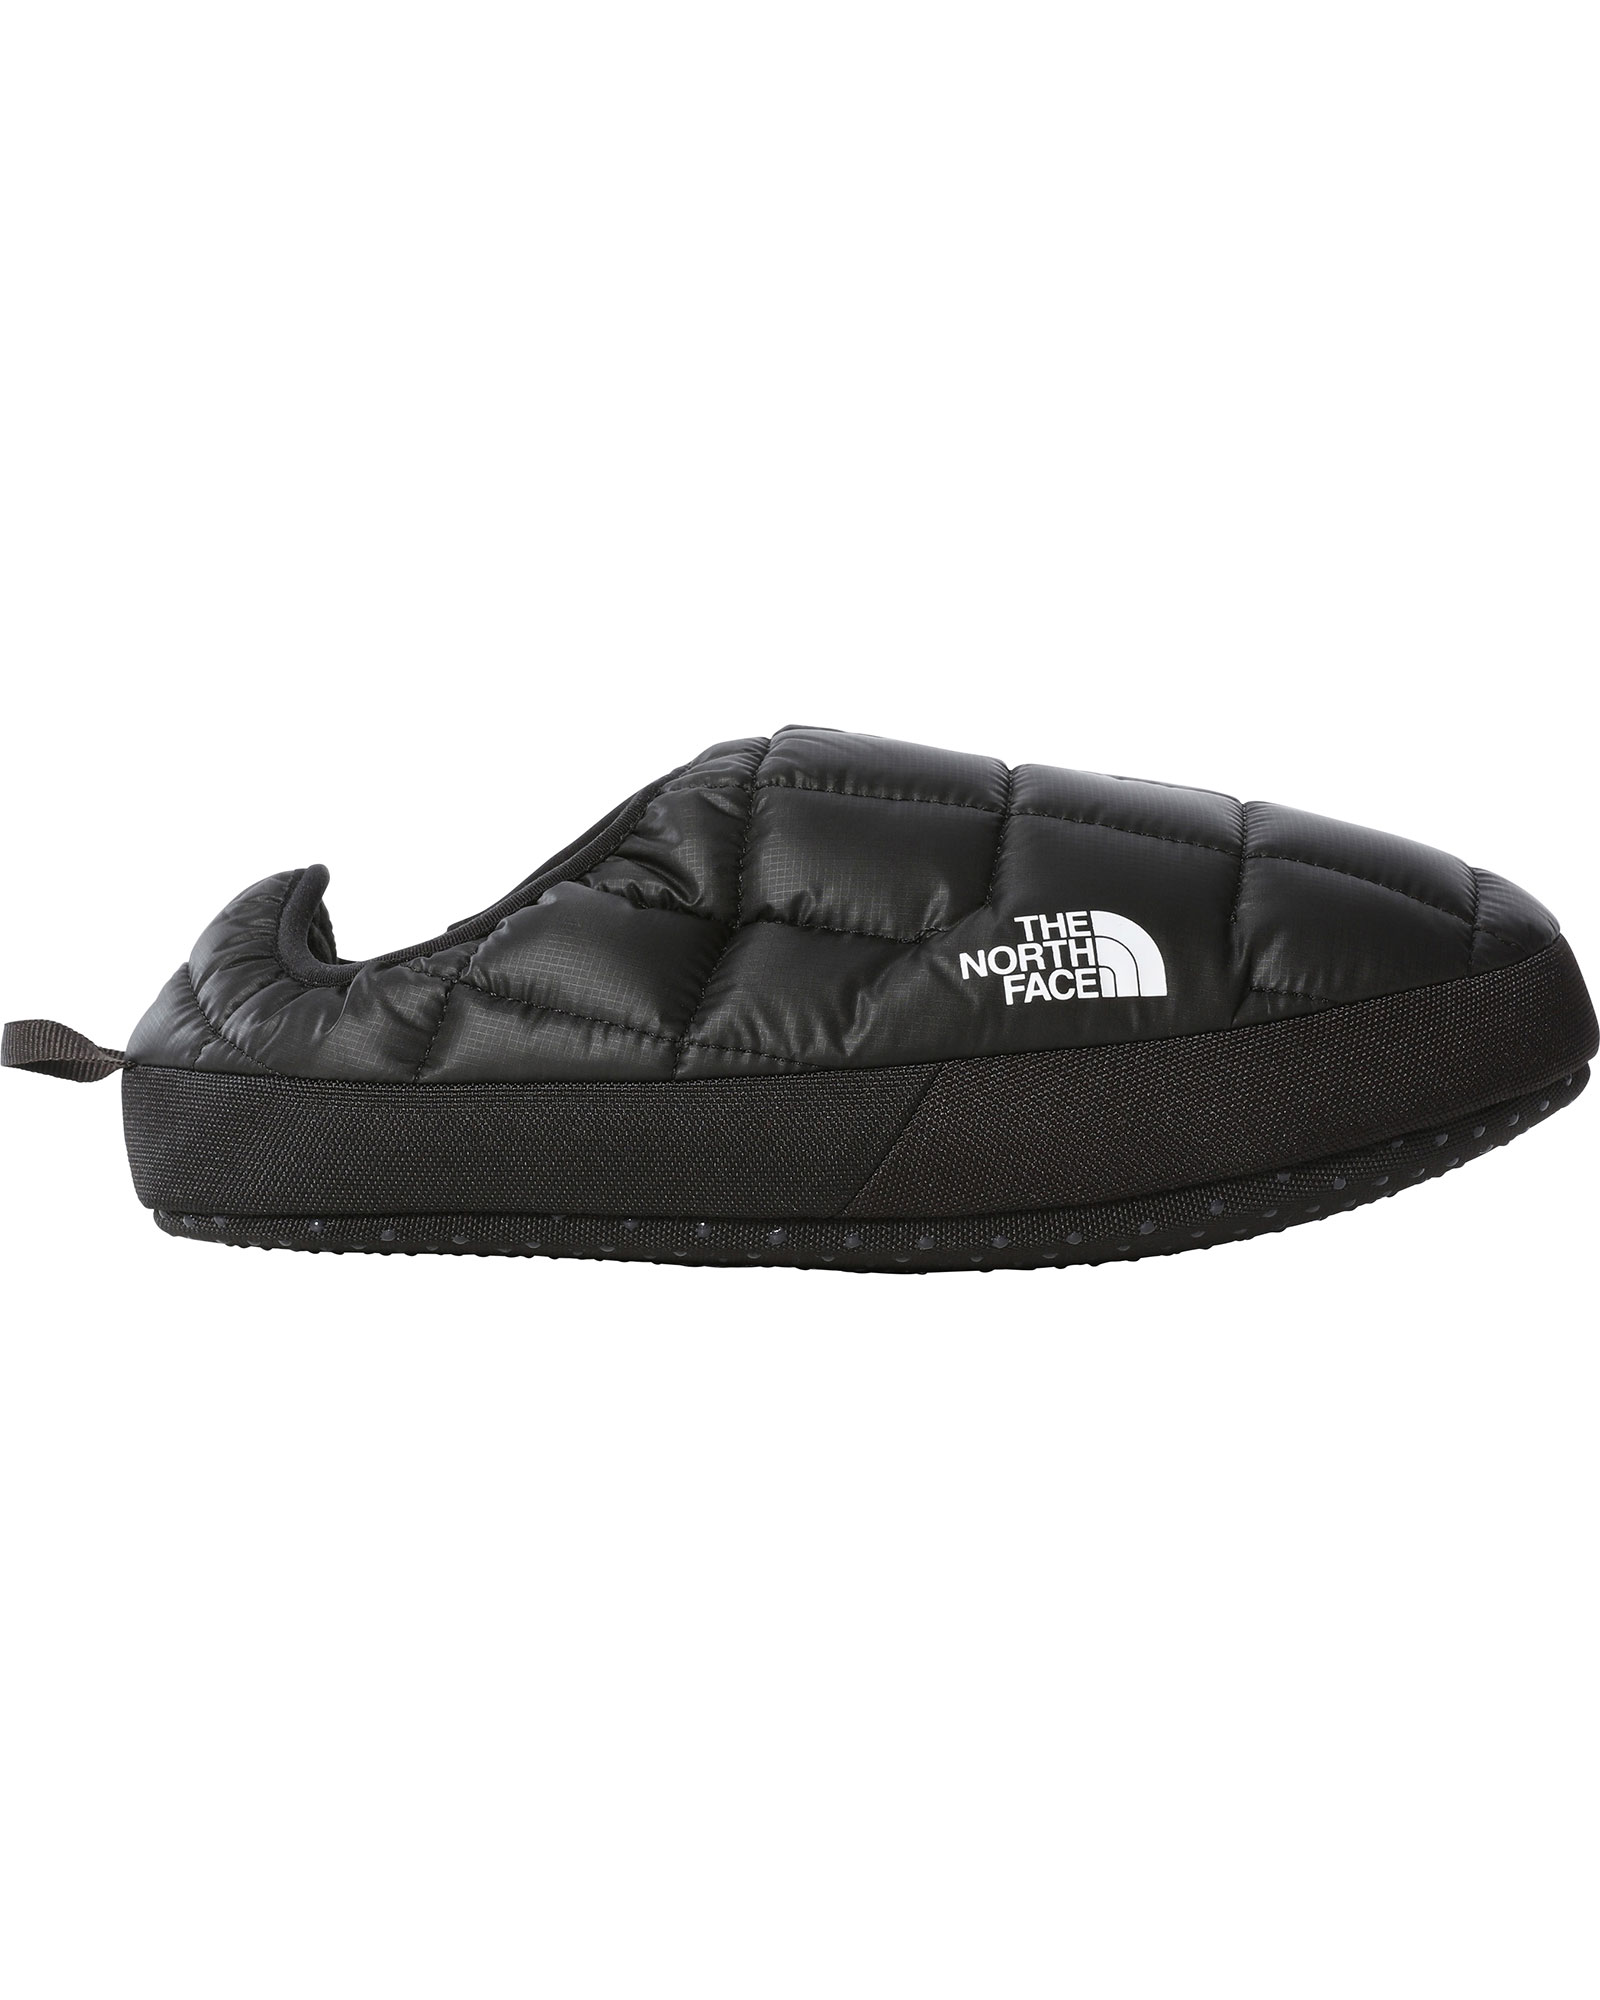 The North Face Women's ThermoBall V Mules